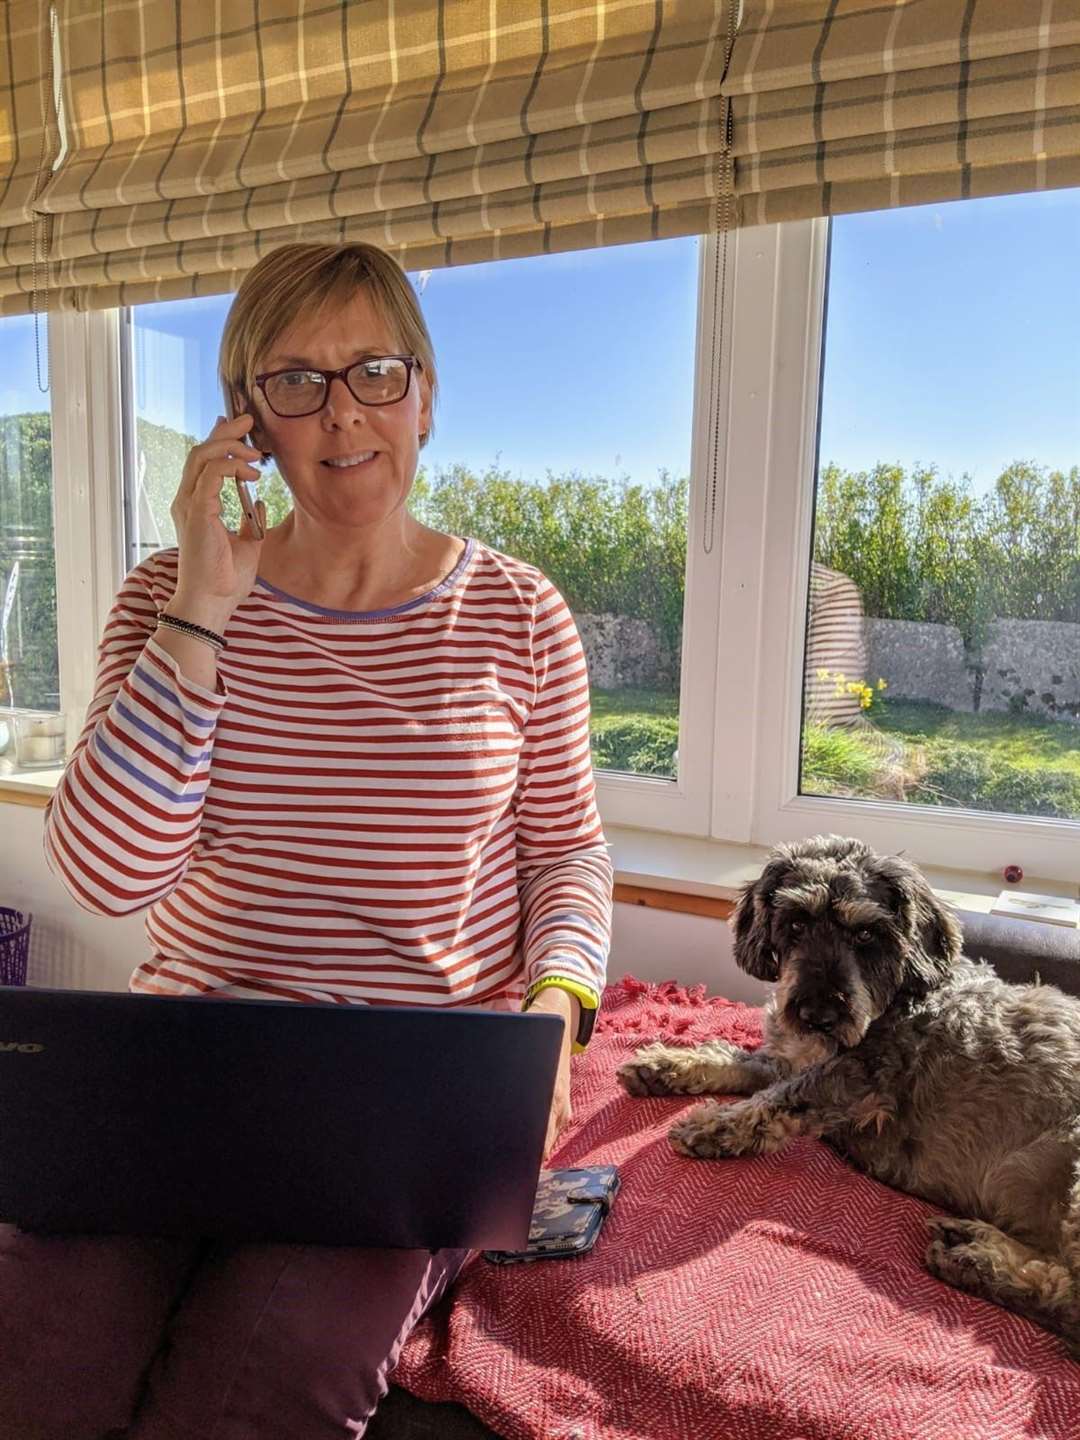 Assistant befriending co-ordinator Elspeth Manson making a call for Befriending Caithness, with family pet Ollie looking on.